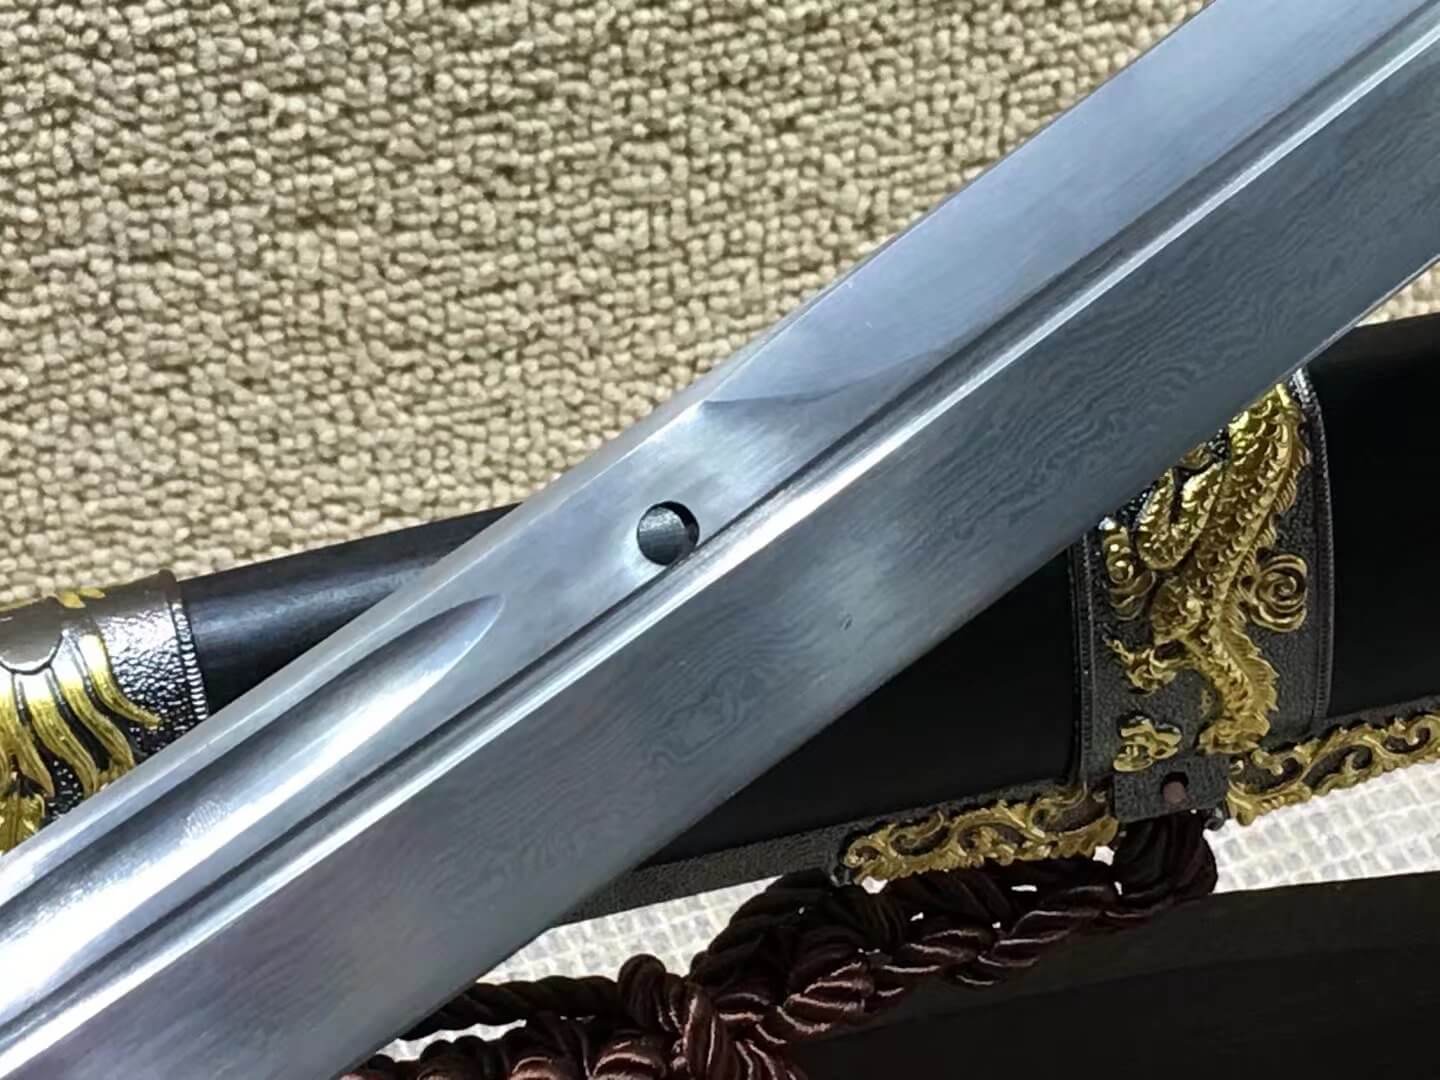 Cut horse broadsword(Damascus steel,Black wood scabbard,Alloy fittings)Length 42" - Chinese sword shop